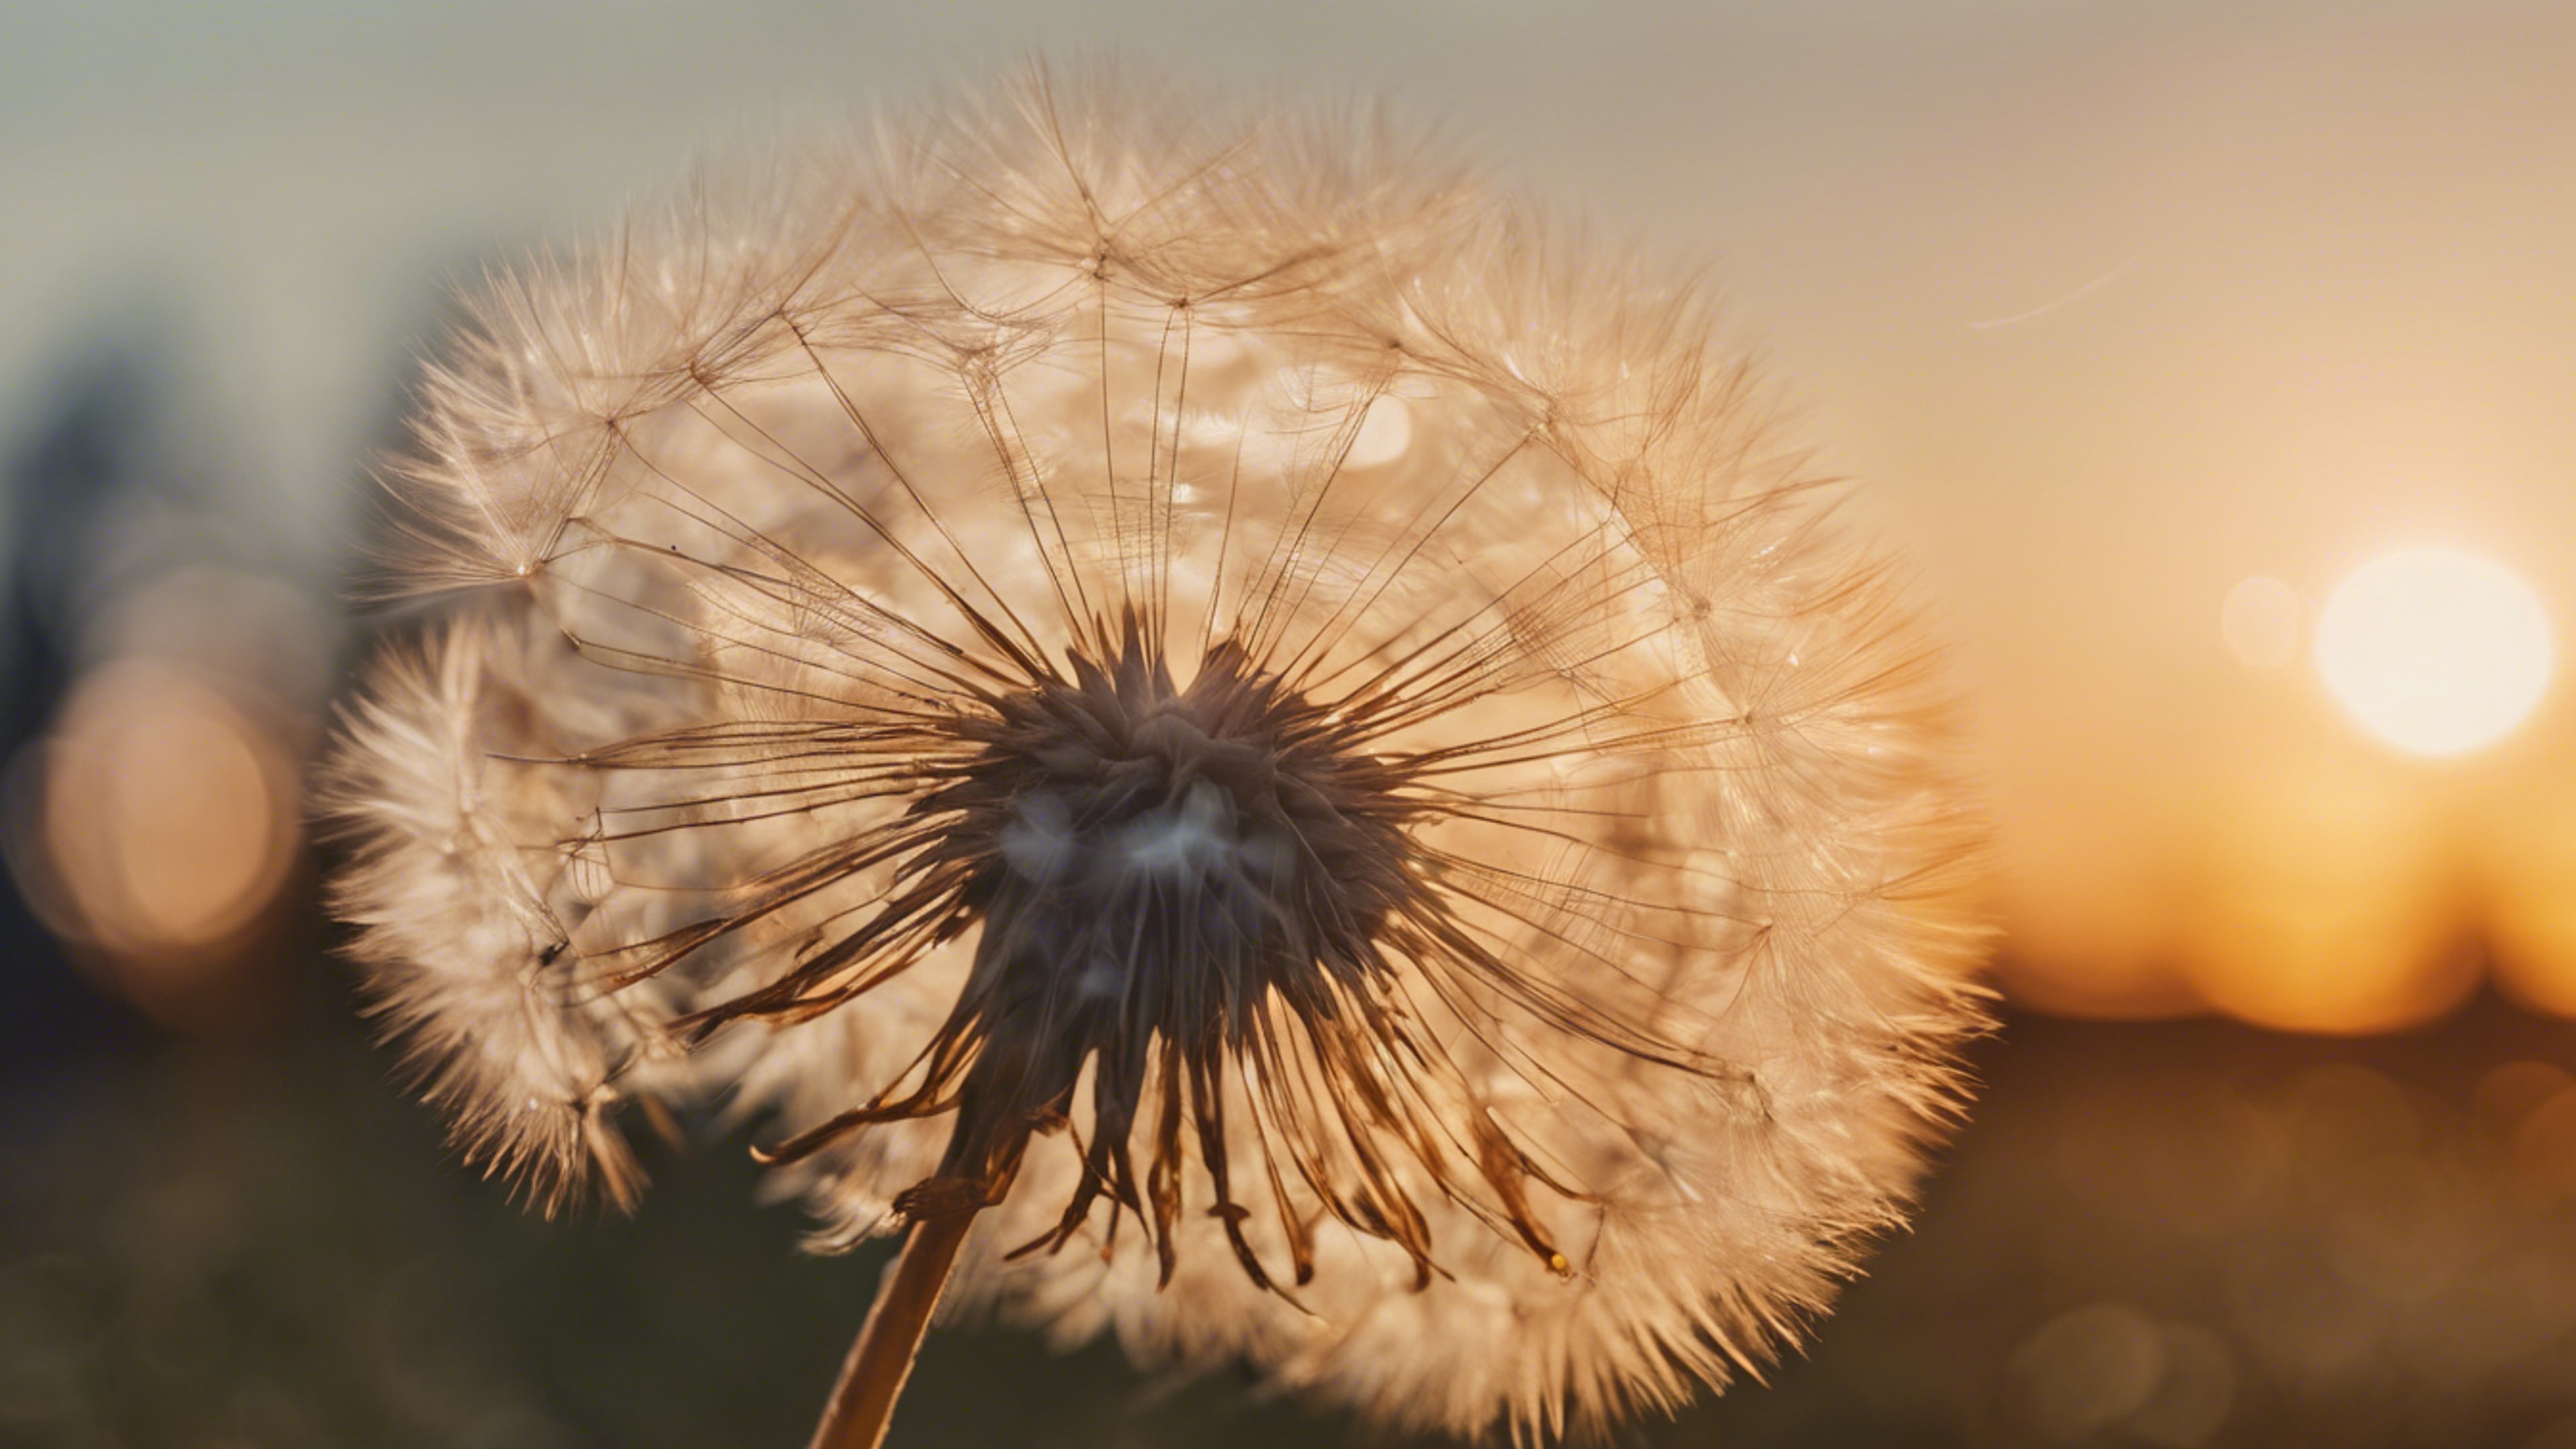 Dandelion seeds being blown in the wind against a sunset backdrop.壁紙[f47338b3f76f4b75b258]